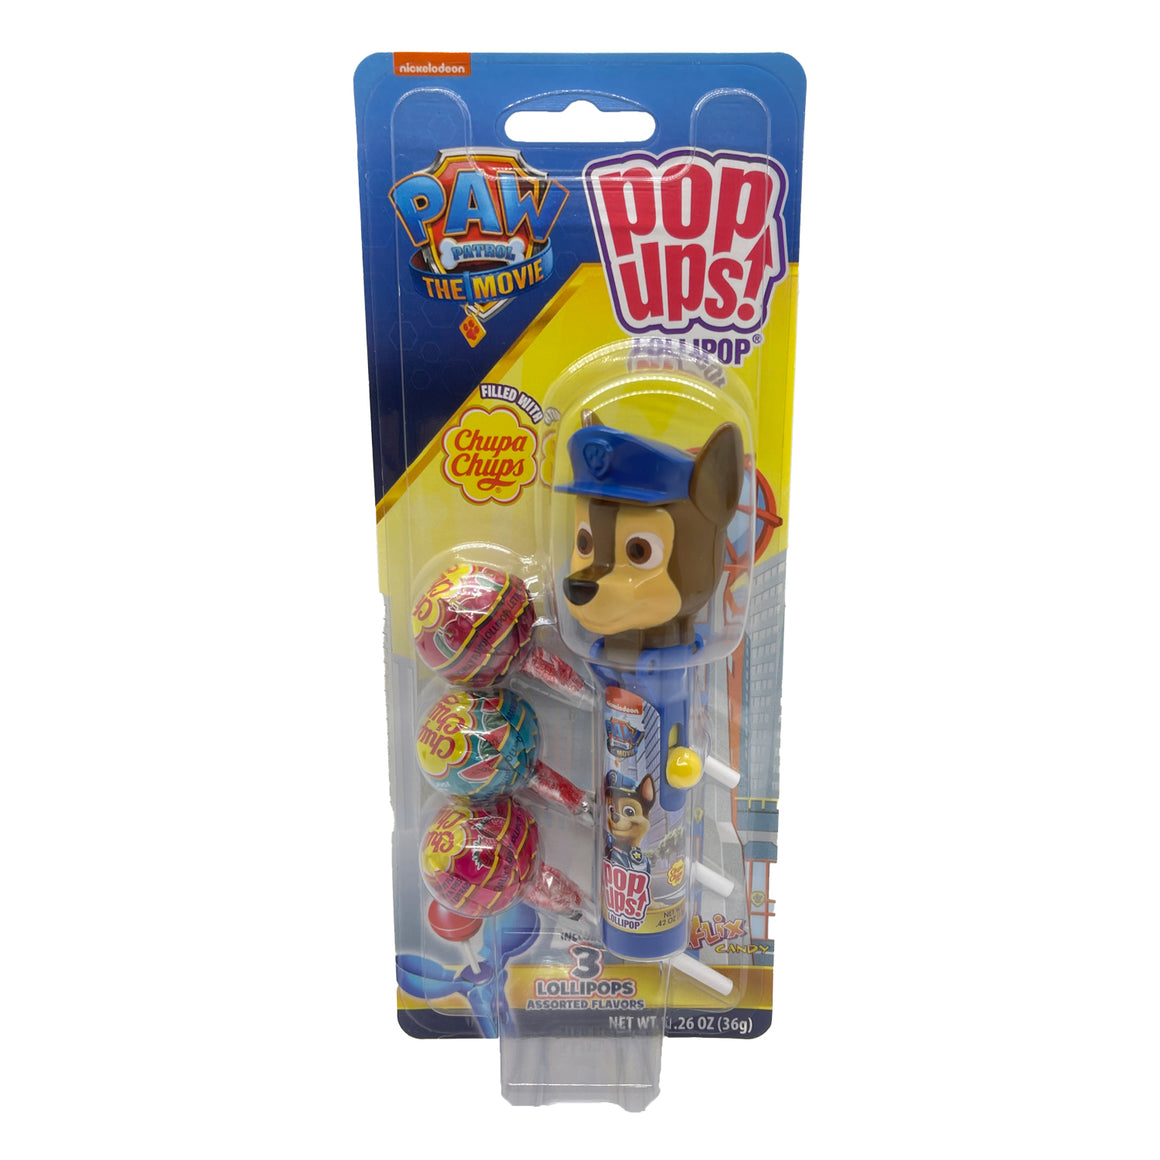 All City Candy Flix Pop ups! Lollipop Paw Patrol Blister Card 1.26 oz. Marshall Novelty Flix Candy For fresh candy and great service, visit www.allcitycandy.com